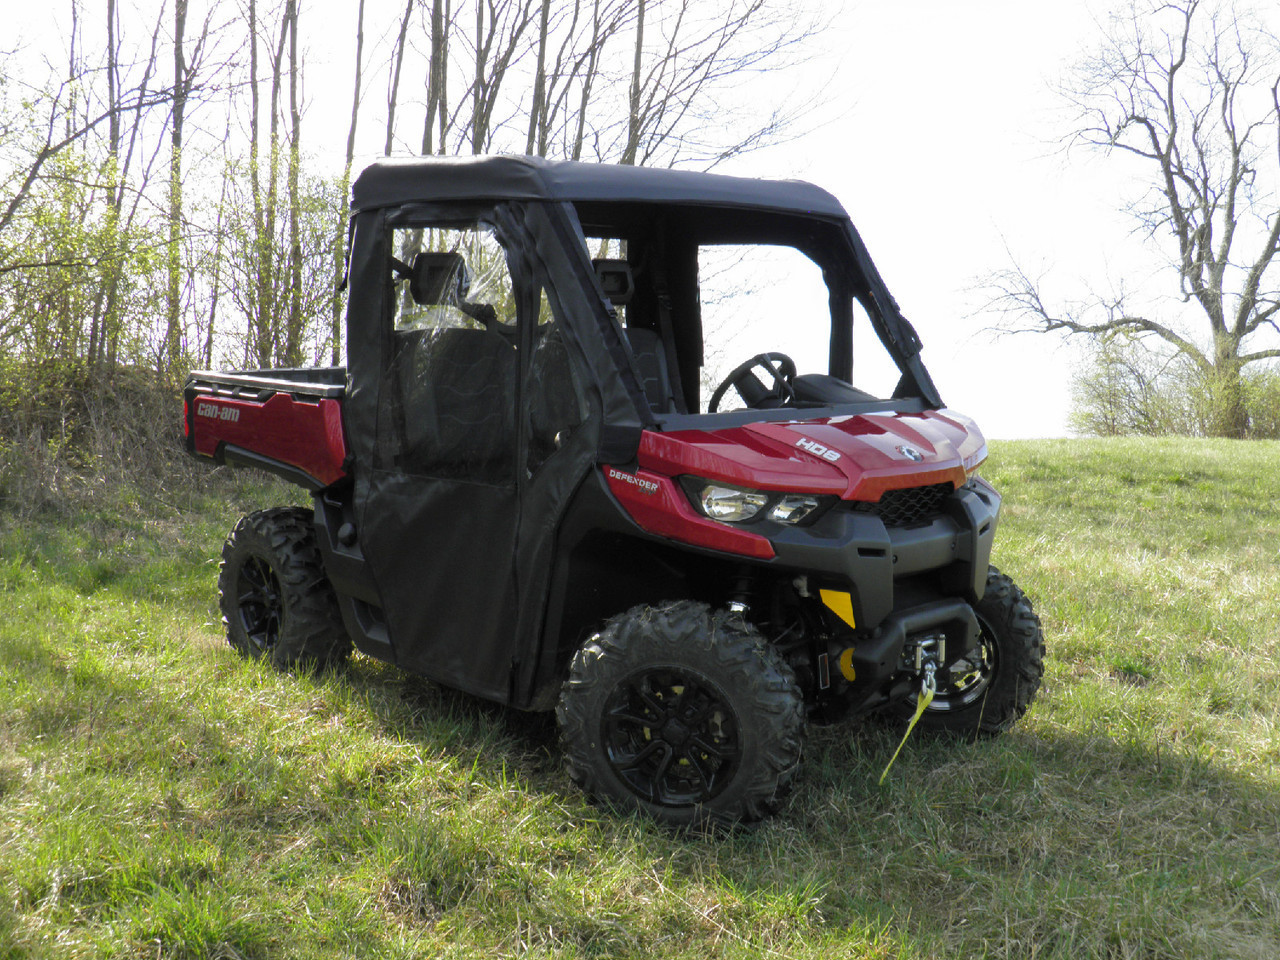 3 Star side x side can-am defender doors front and side angle view